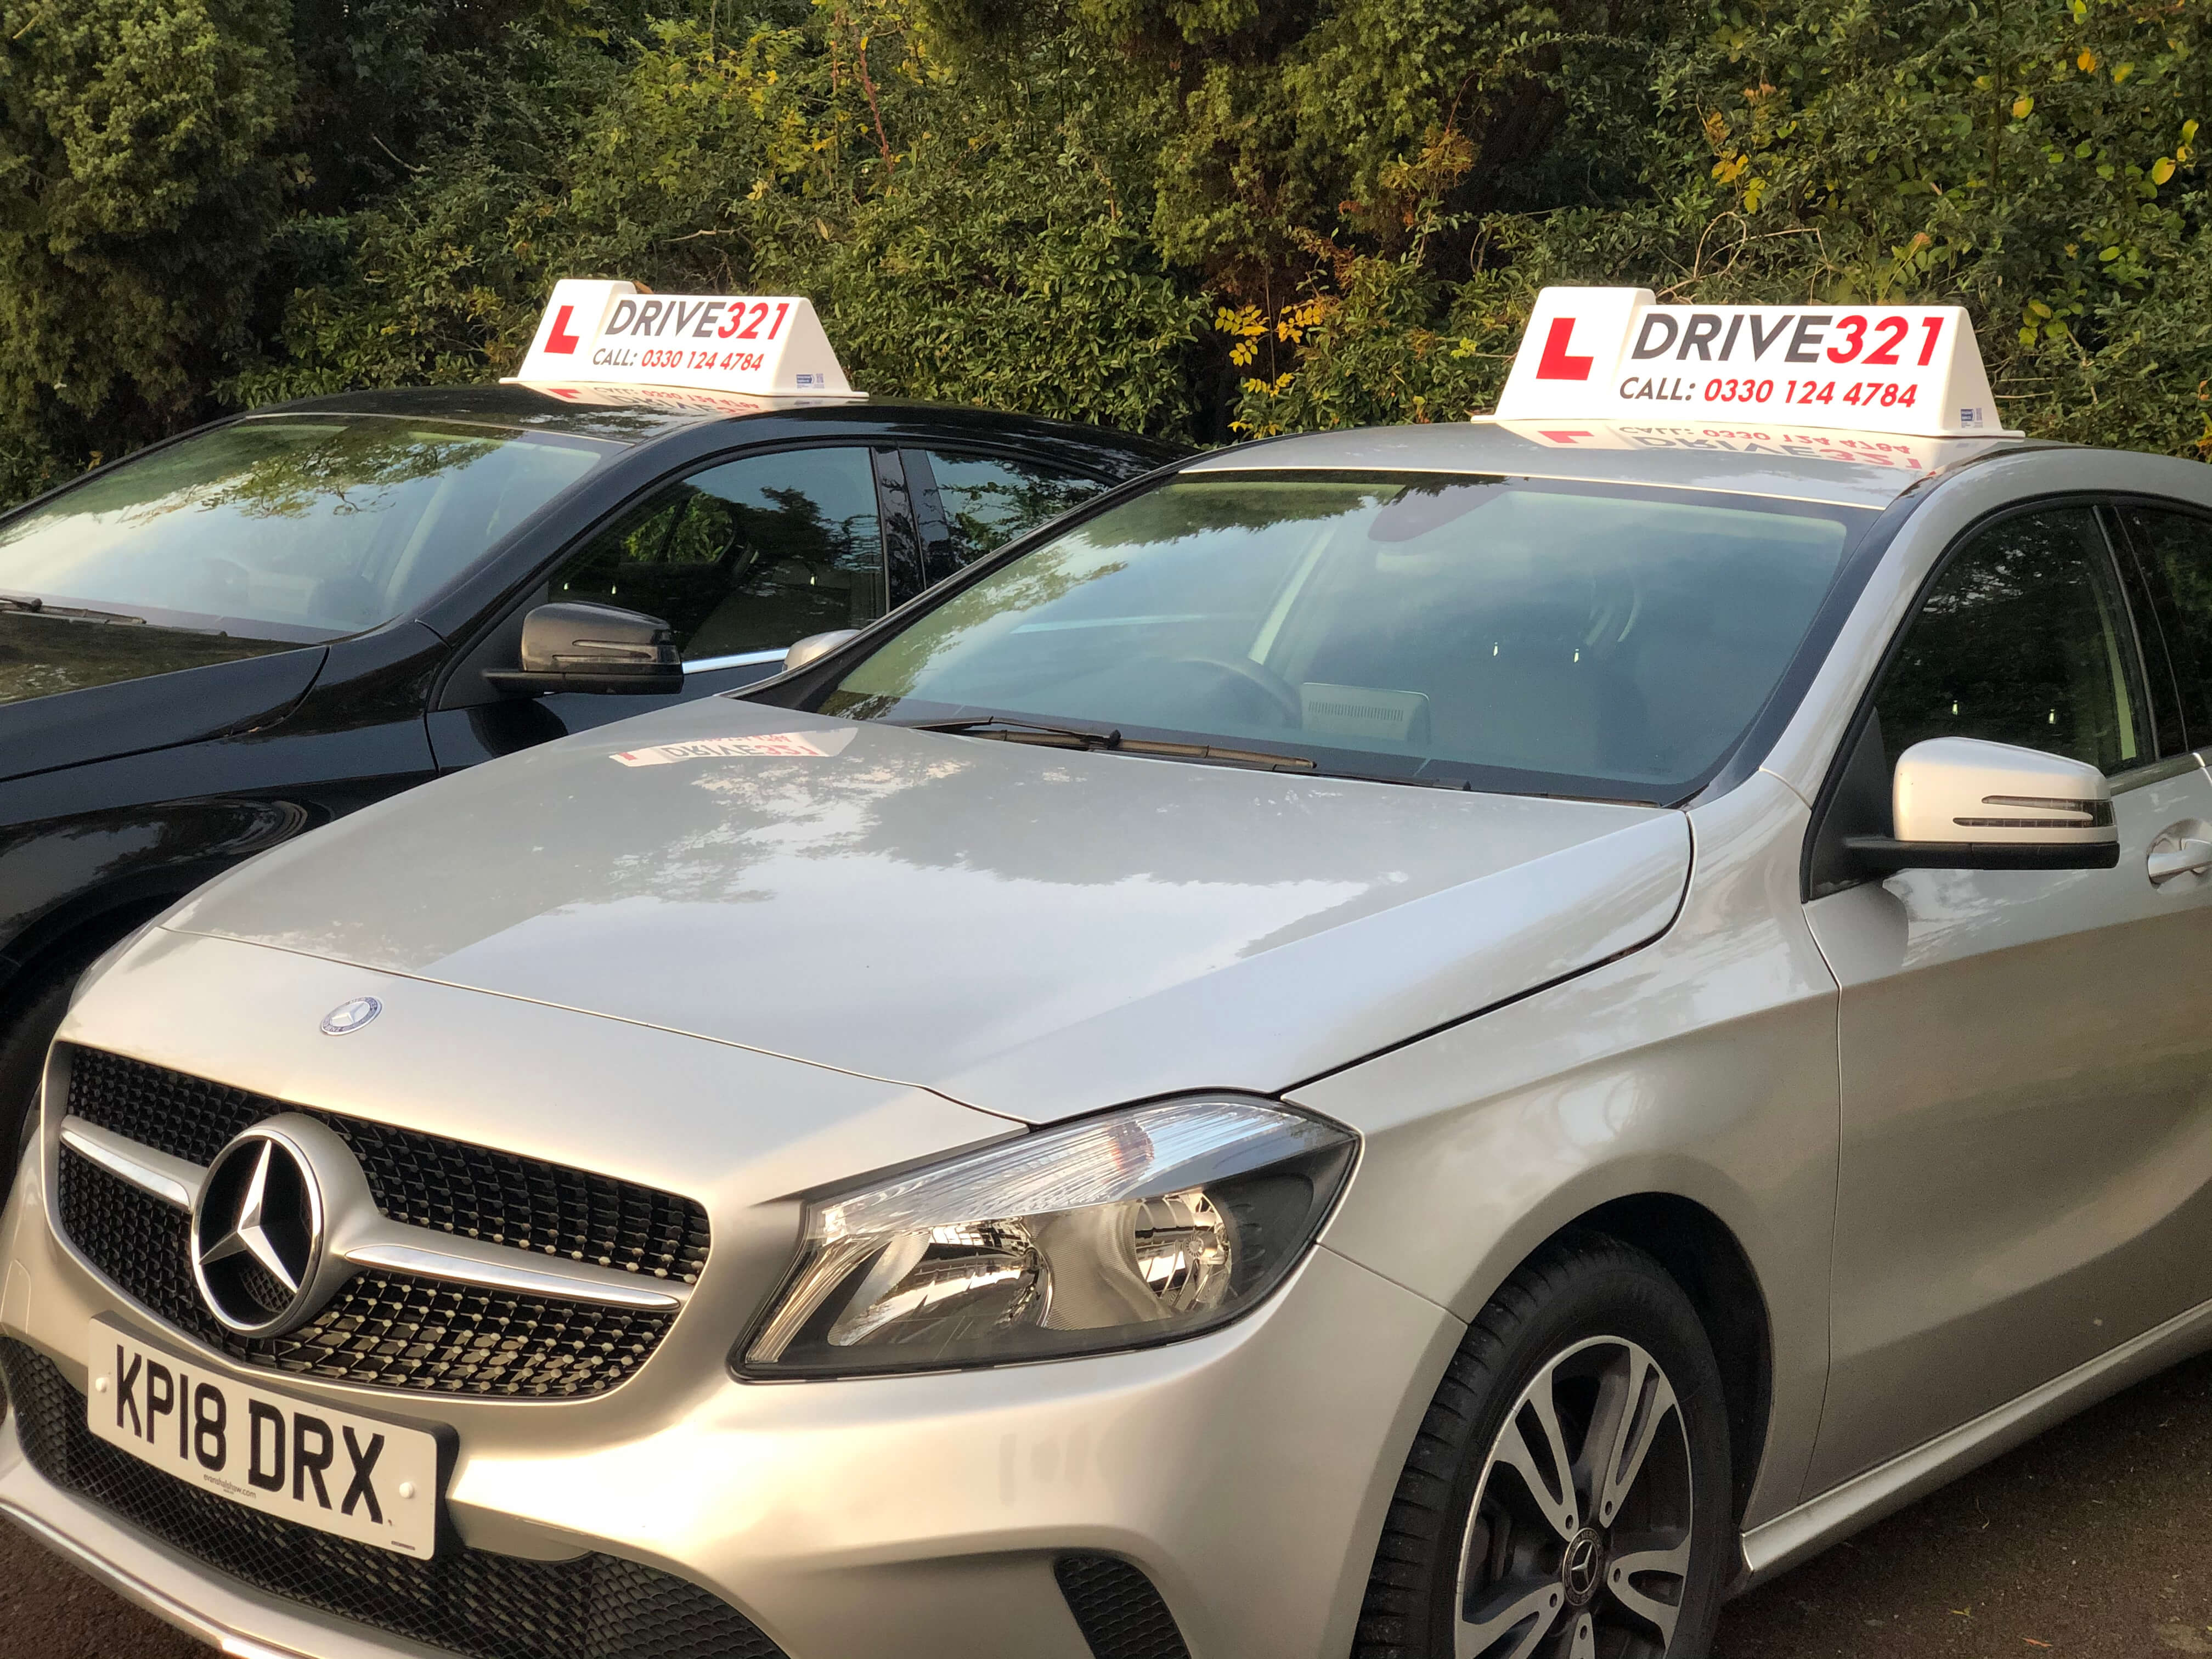 Intensive driving lessons in Birmingham